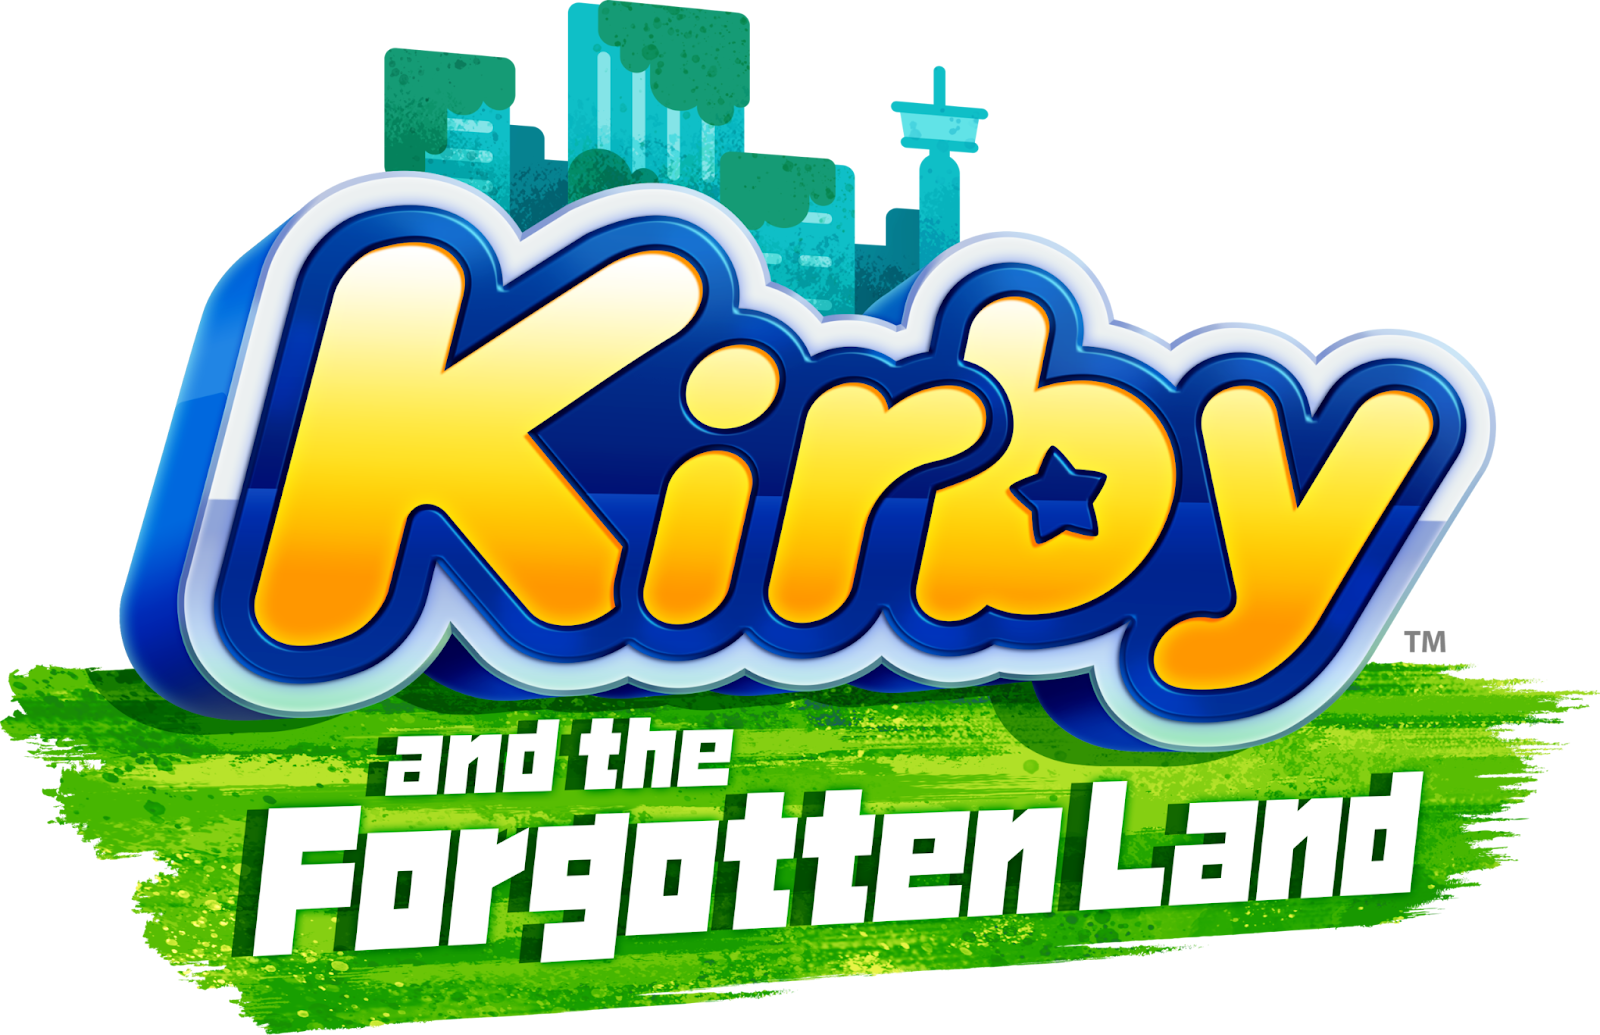 Surprising No One, Kirby And The Forgotten Land Is Adorable - GameSpot